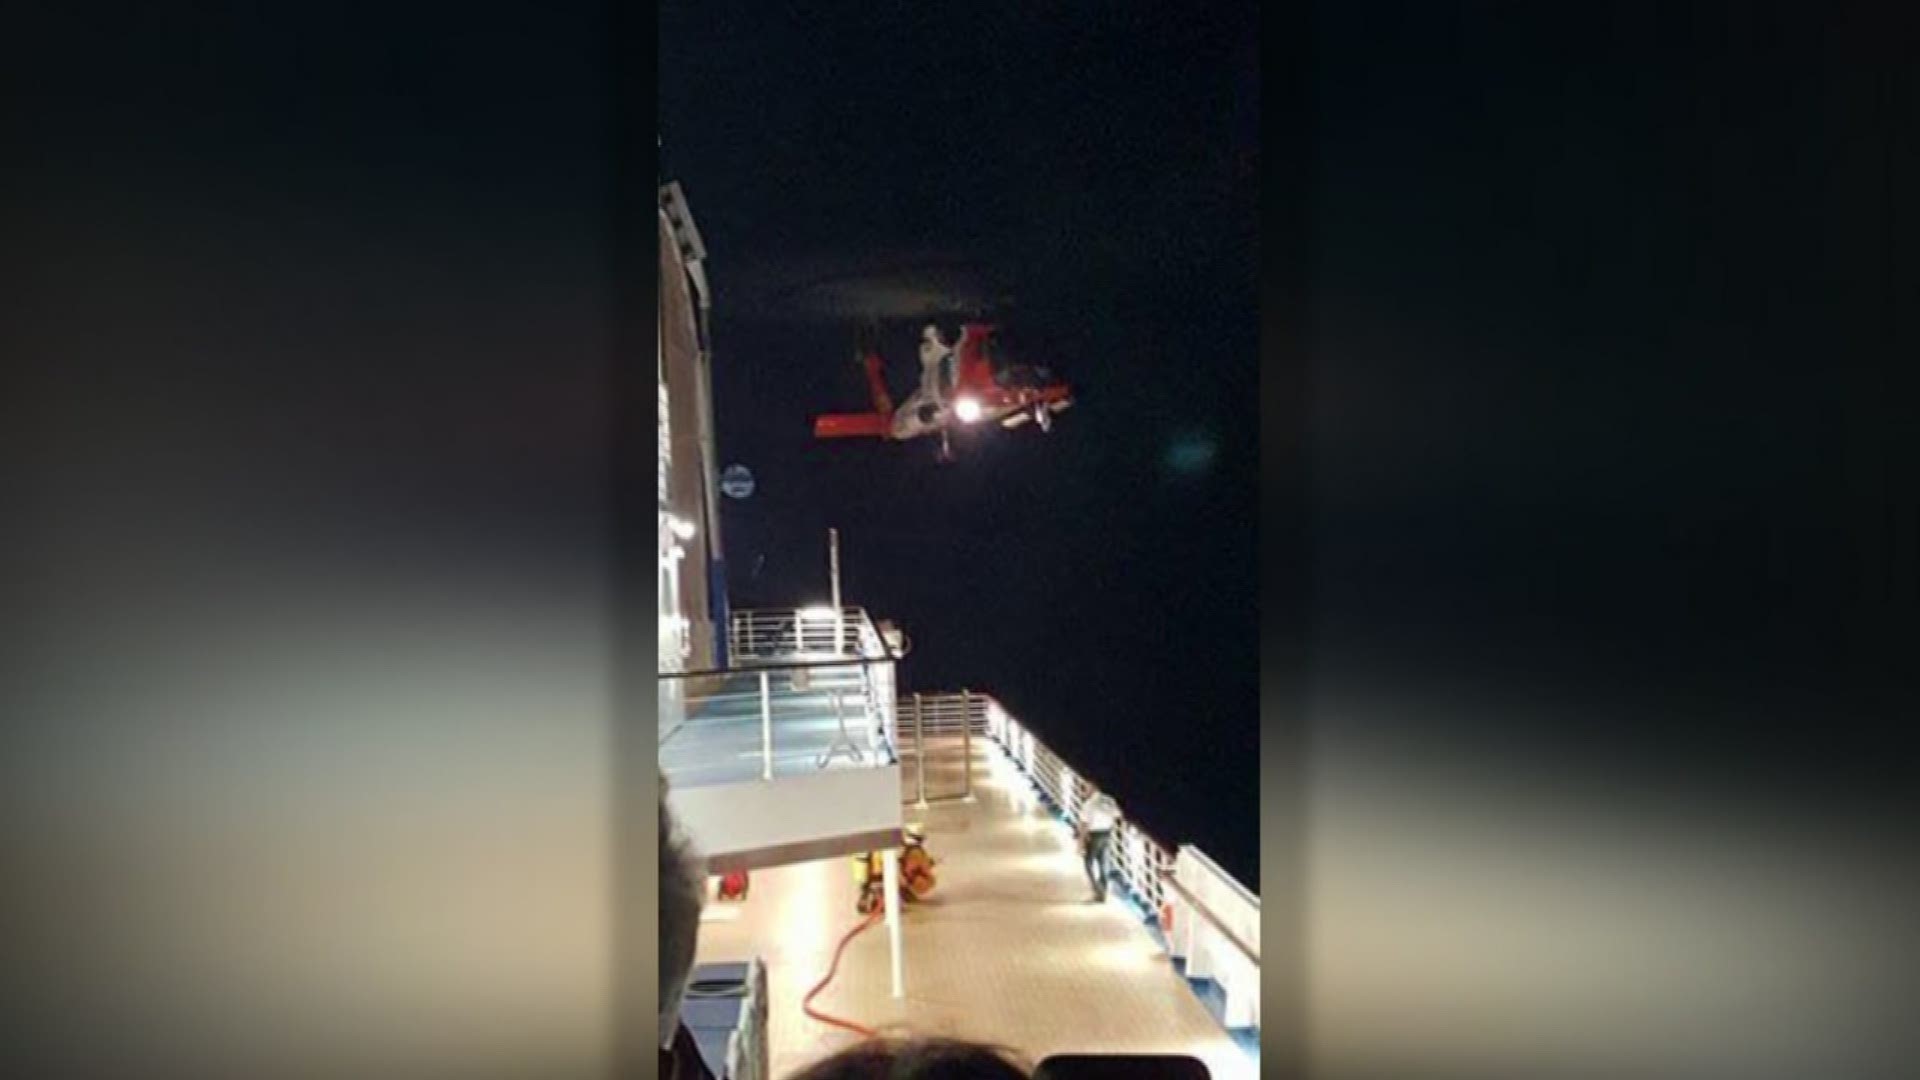 A young girl was airlifted to the hospital after falling from a balcony on board the Carnival Breeze cruise ship.